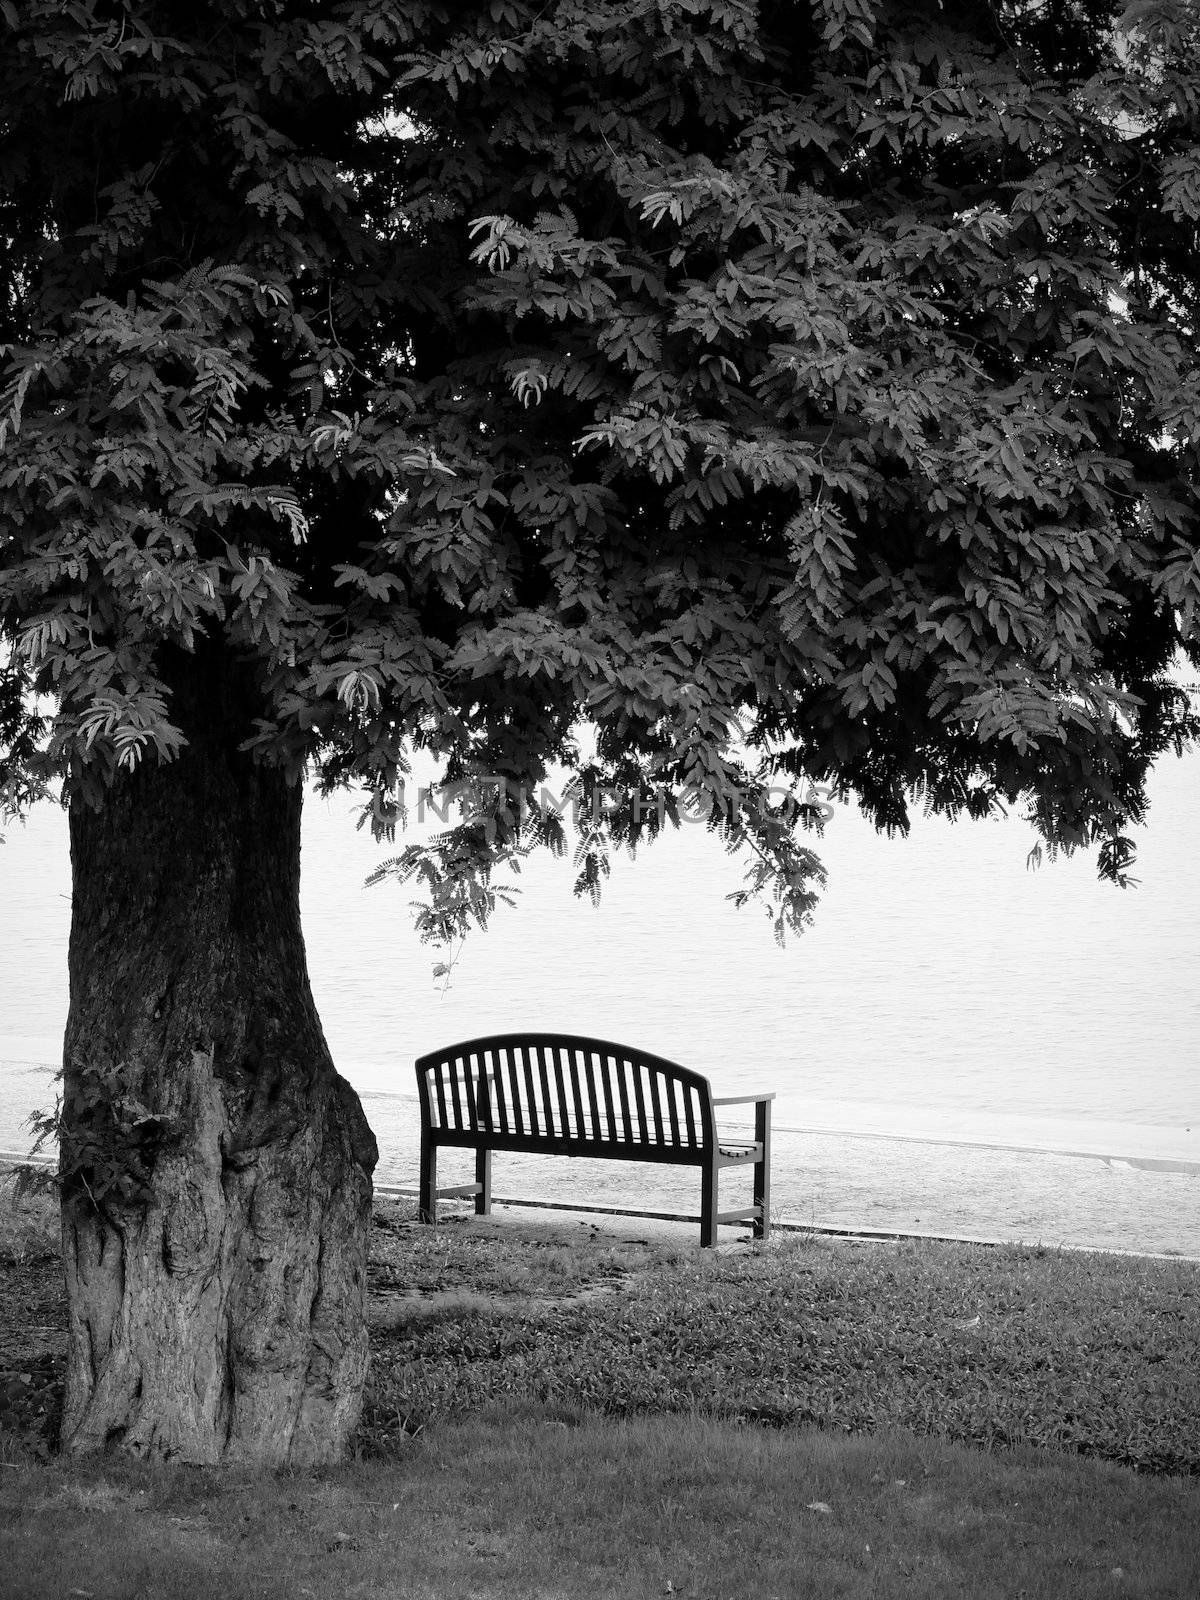 Lonely park bench in black and white by nuchylee